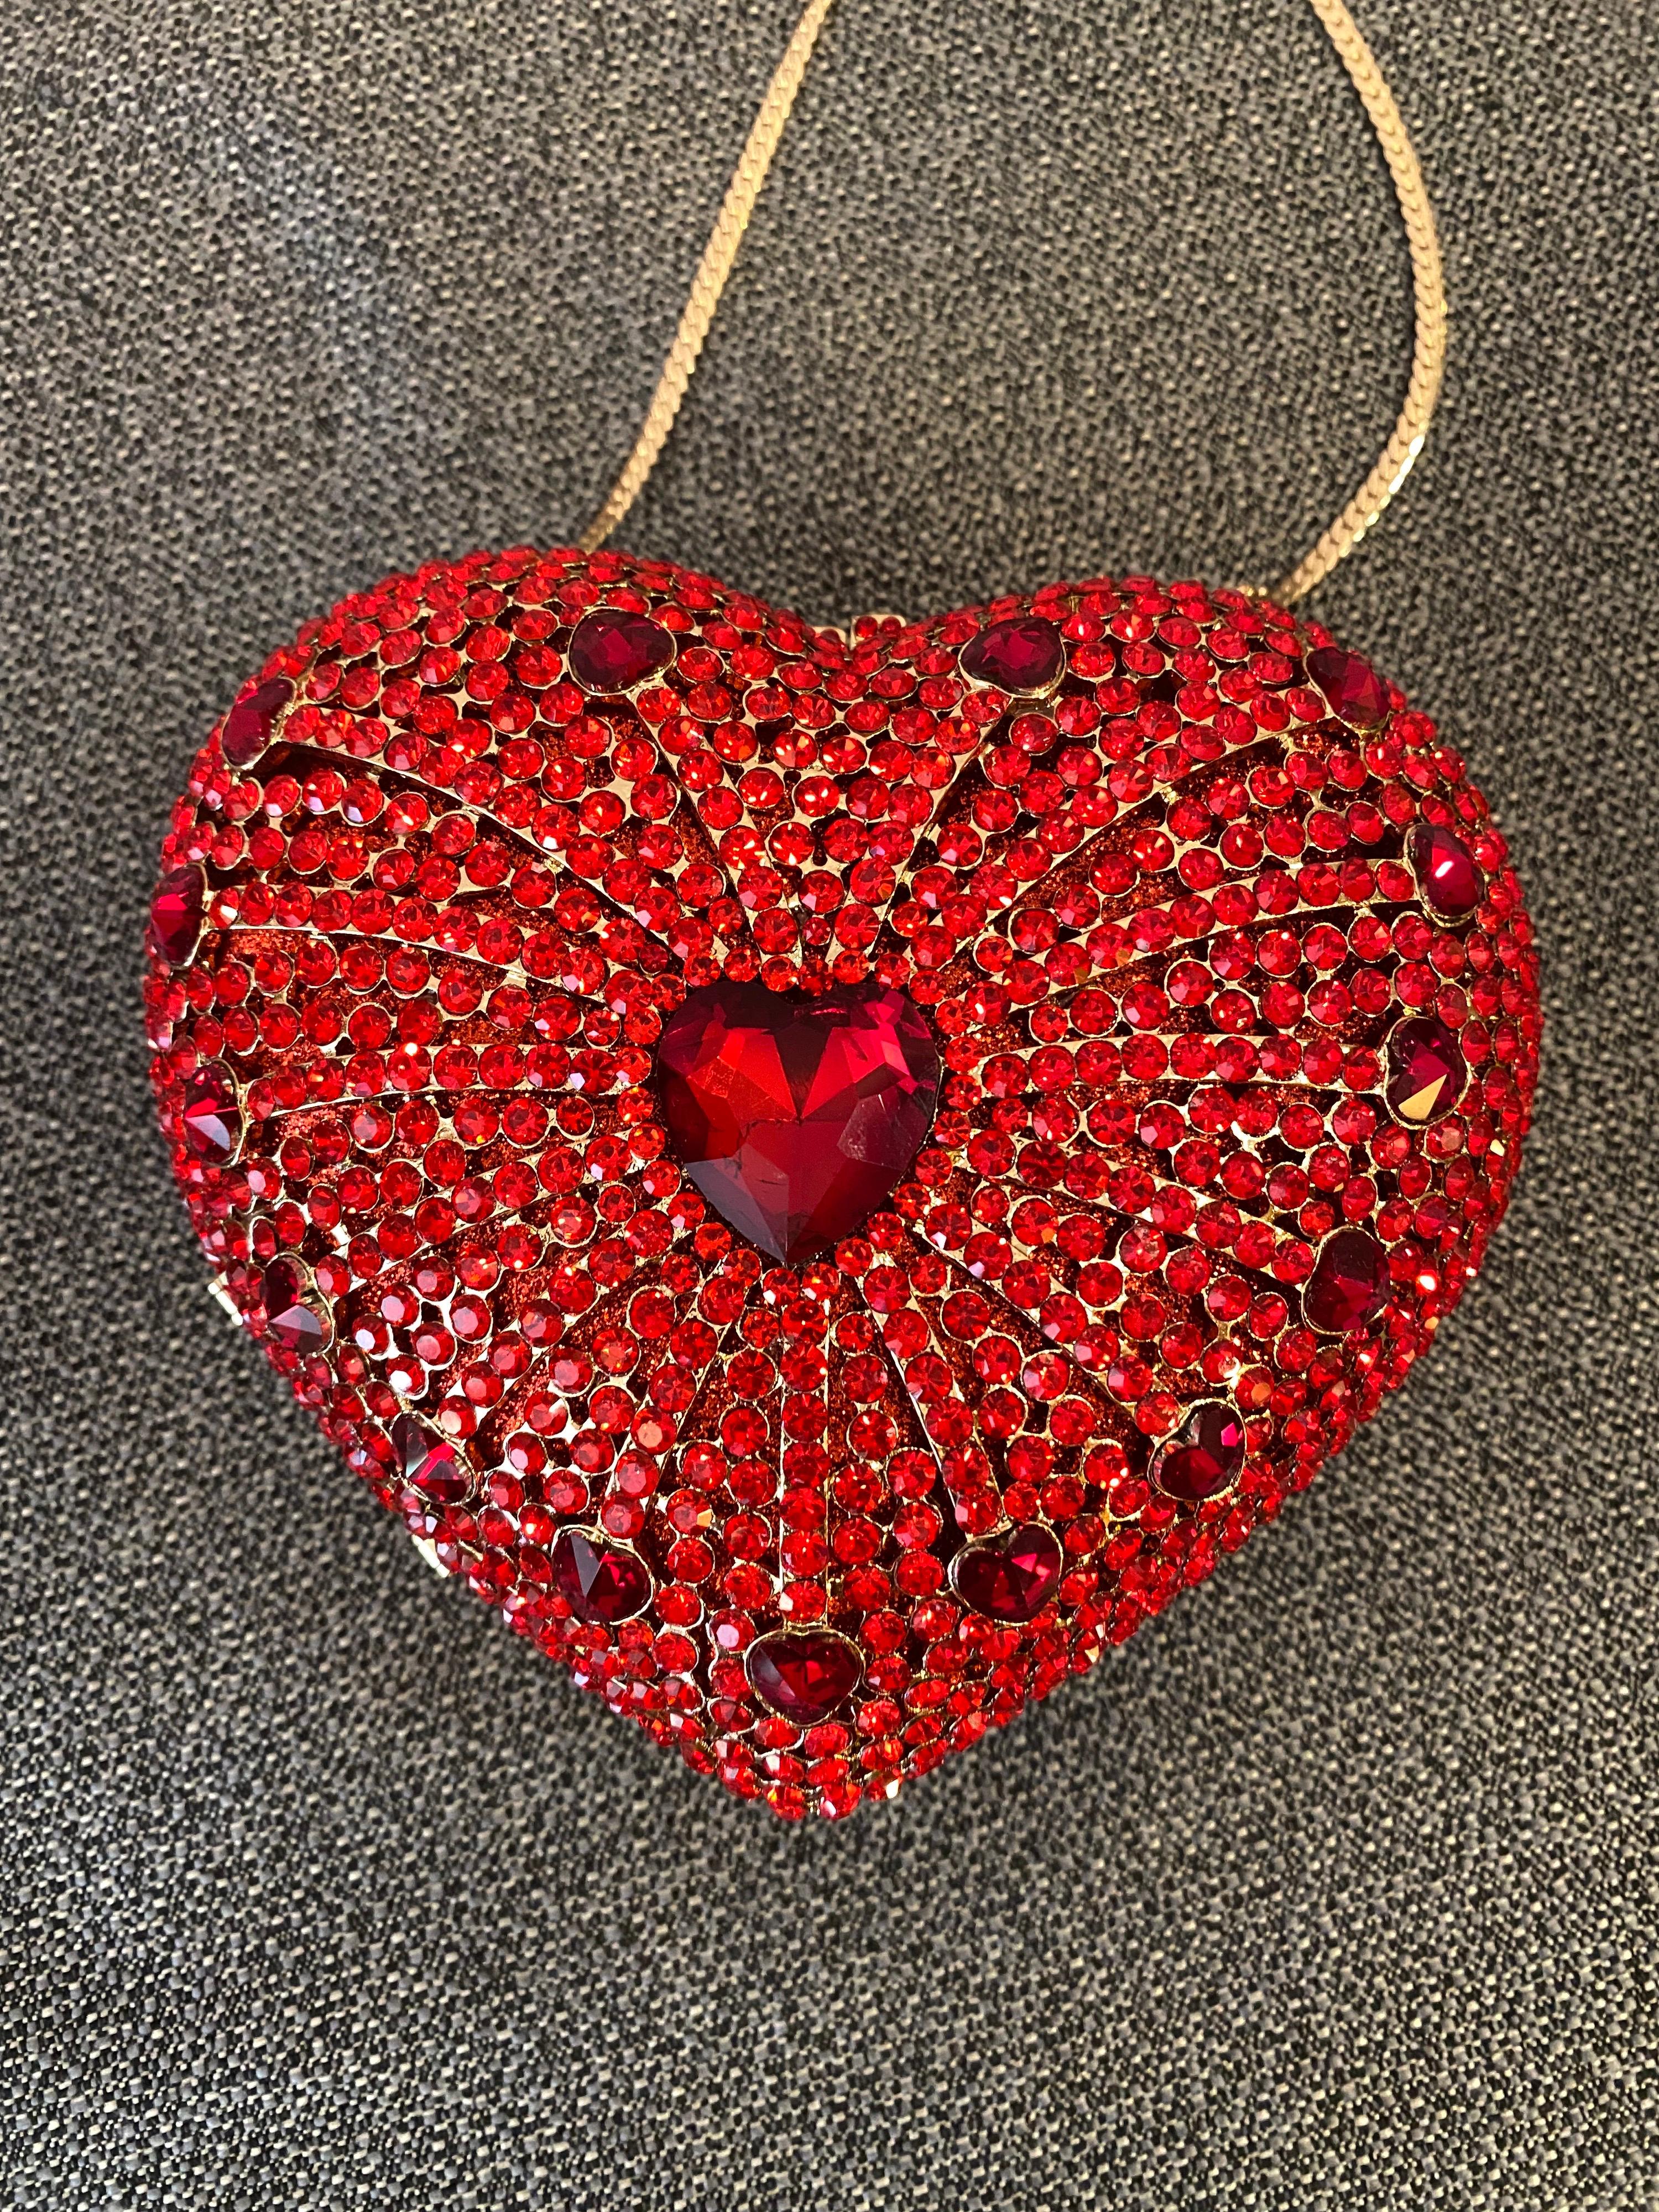 Bling Bling! Judith Leiber style jeweled heart shaped purse. Nice quality with leather interior.